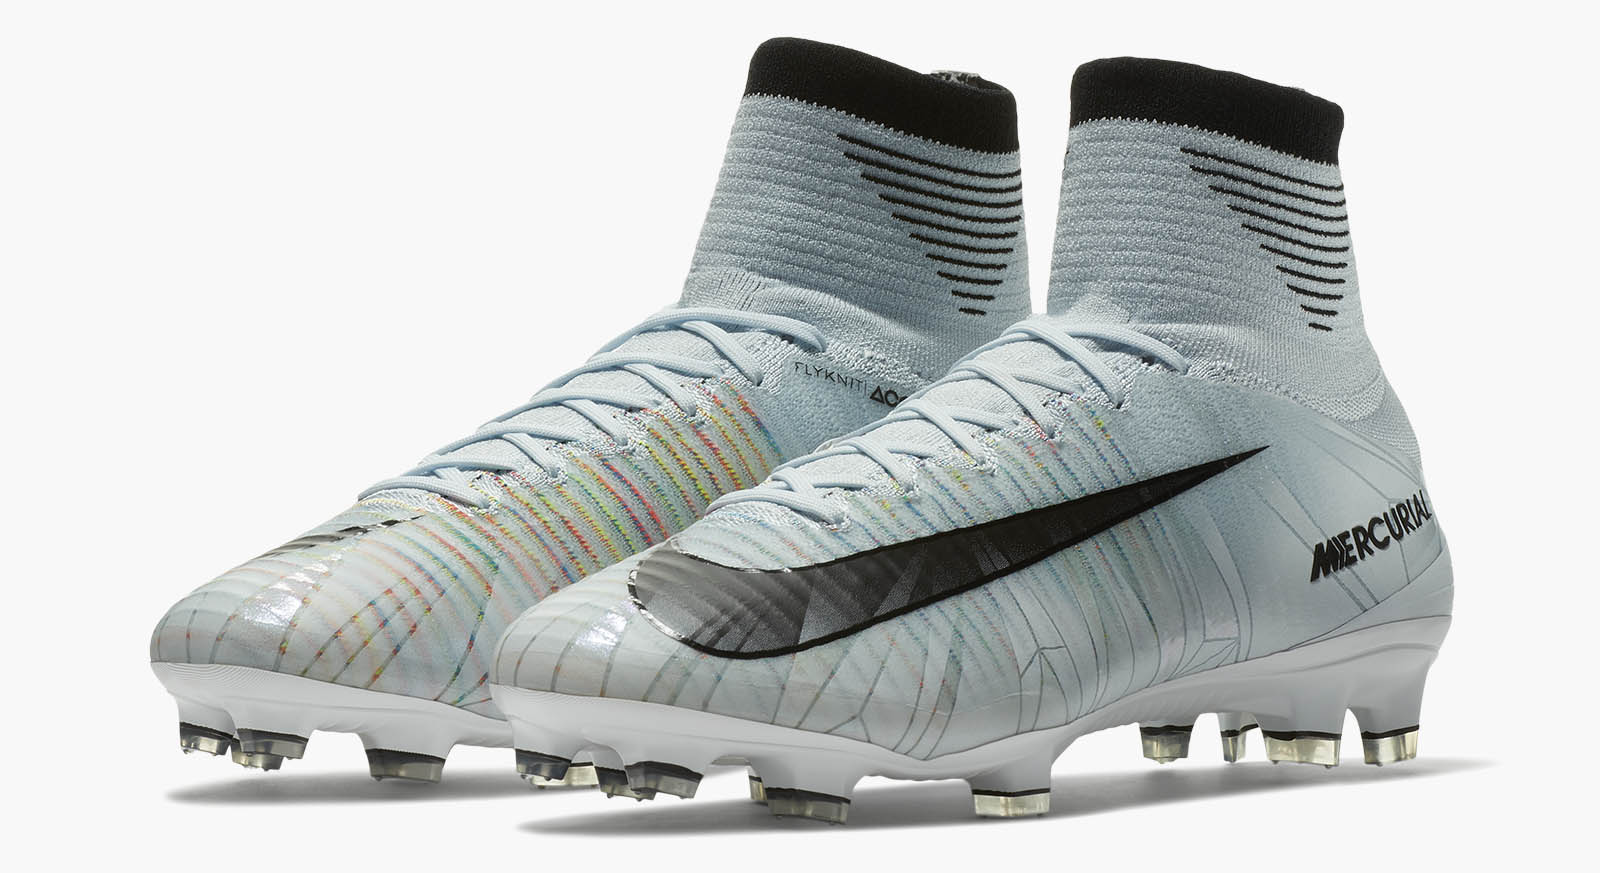 Deshonestidad Caramelo Independencia Nike Mercurial Superfly V Cristiano Ronaldo Chapter 5 'Cut to Brilliance'  Boots Released - Footy Headlines